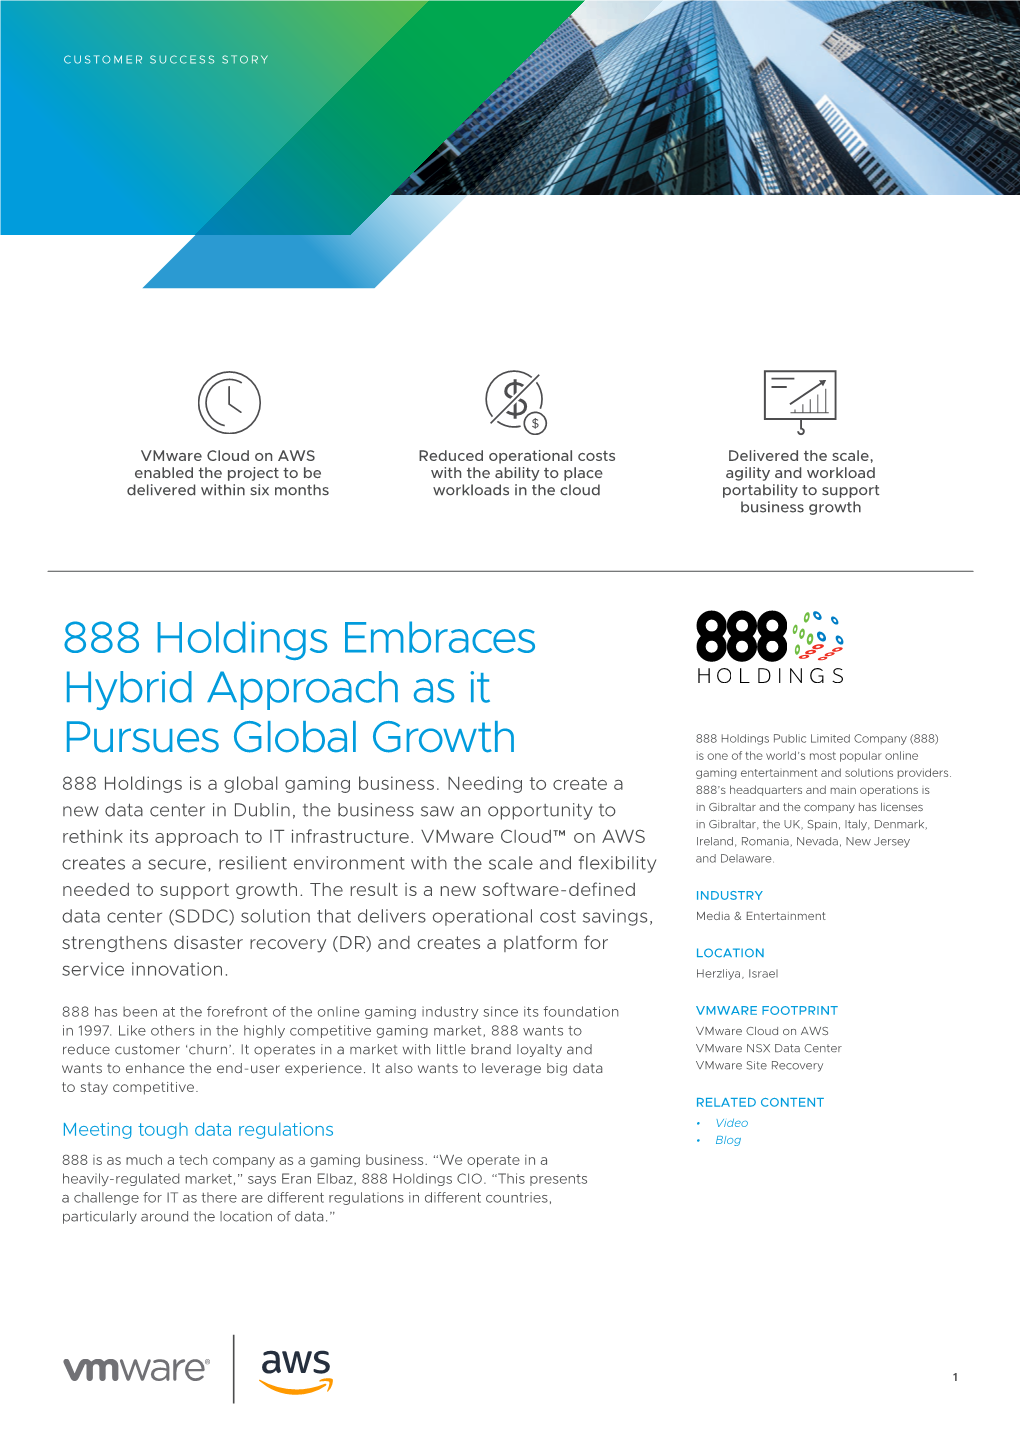 888 Holdings Embraces Hybrid Approach As It Pursues Global Growth